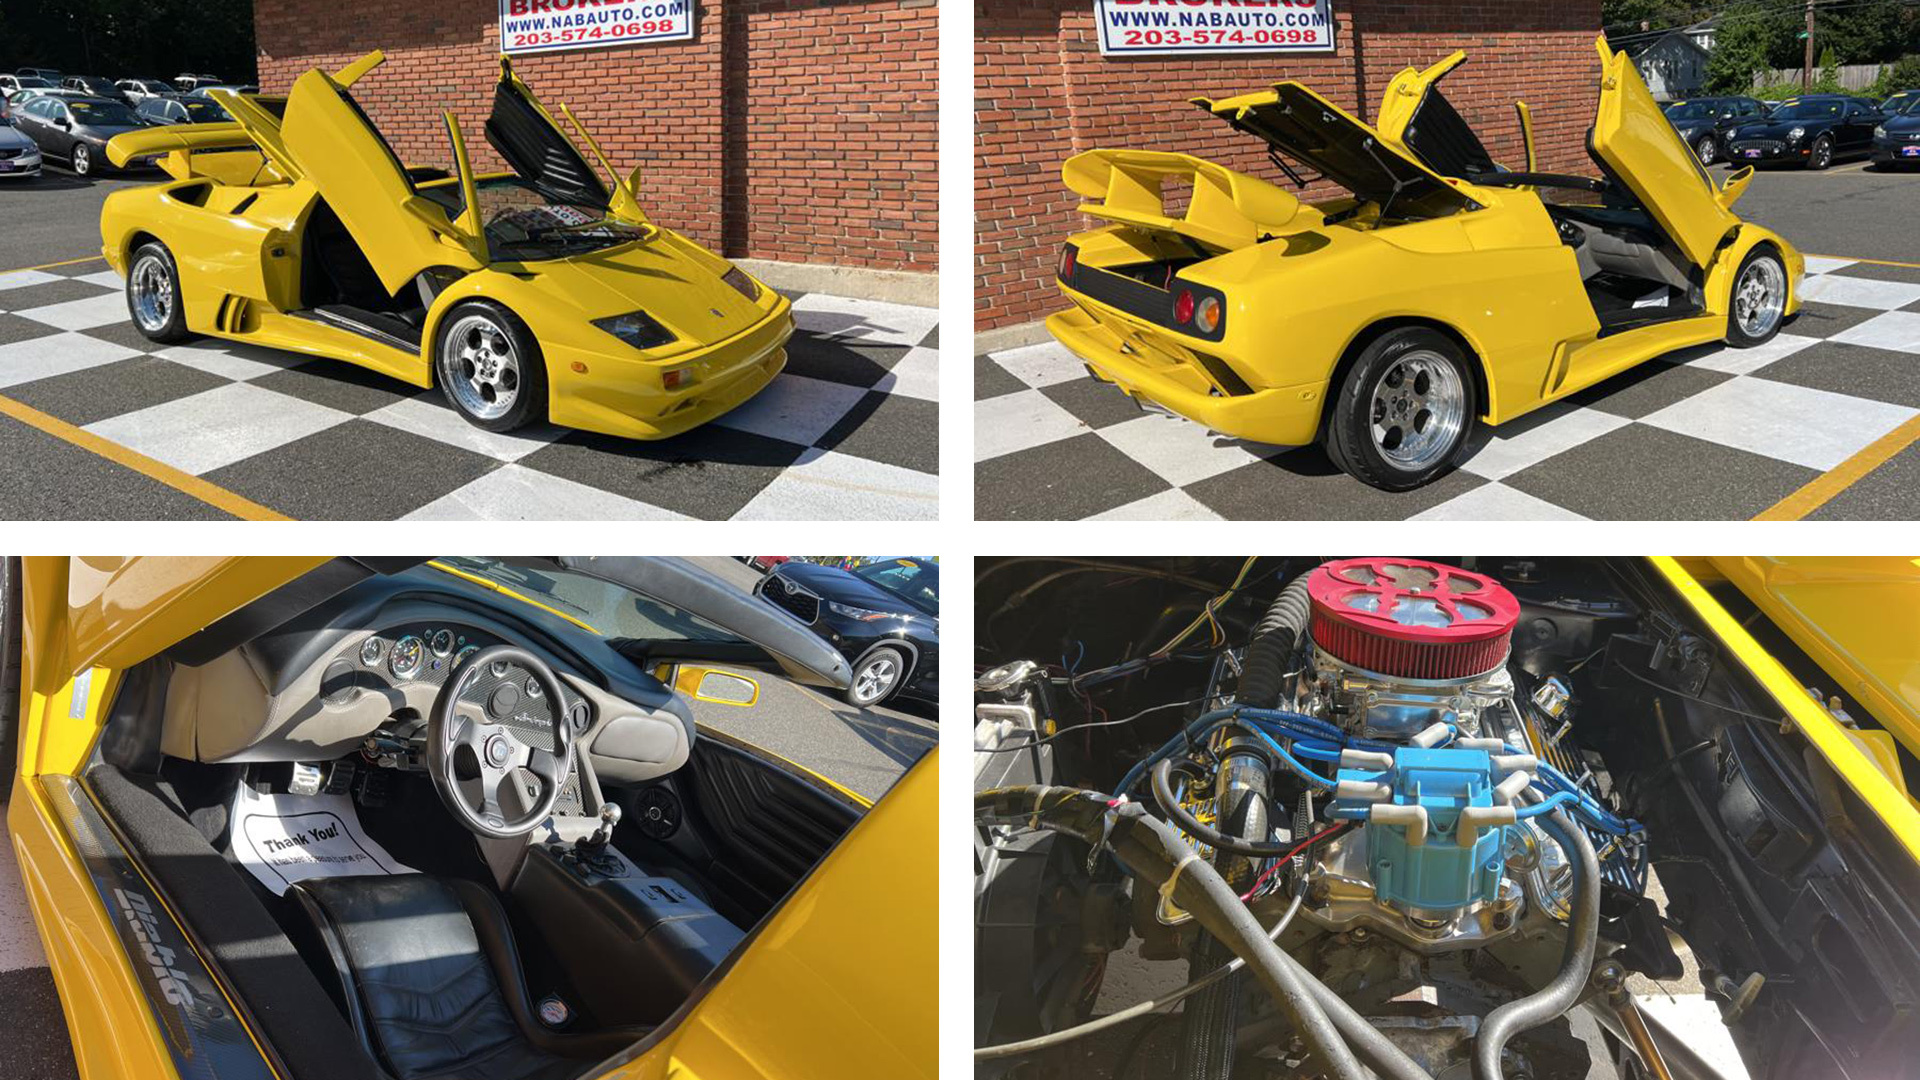 Cover Your Eyes Kids, A Confused Pontiac Fiero Is Masquerading As A Ferrari  Enzo